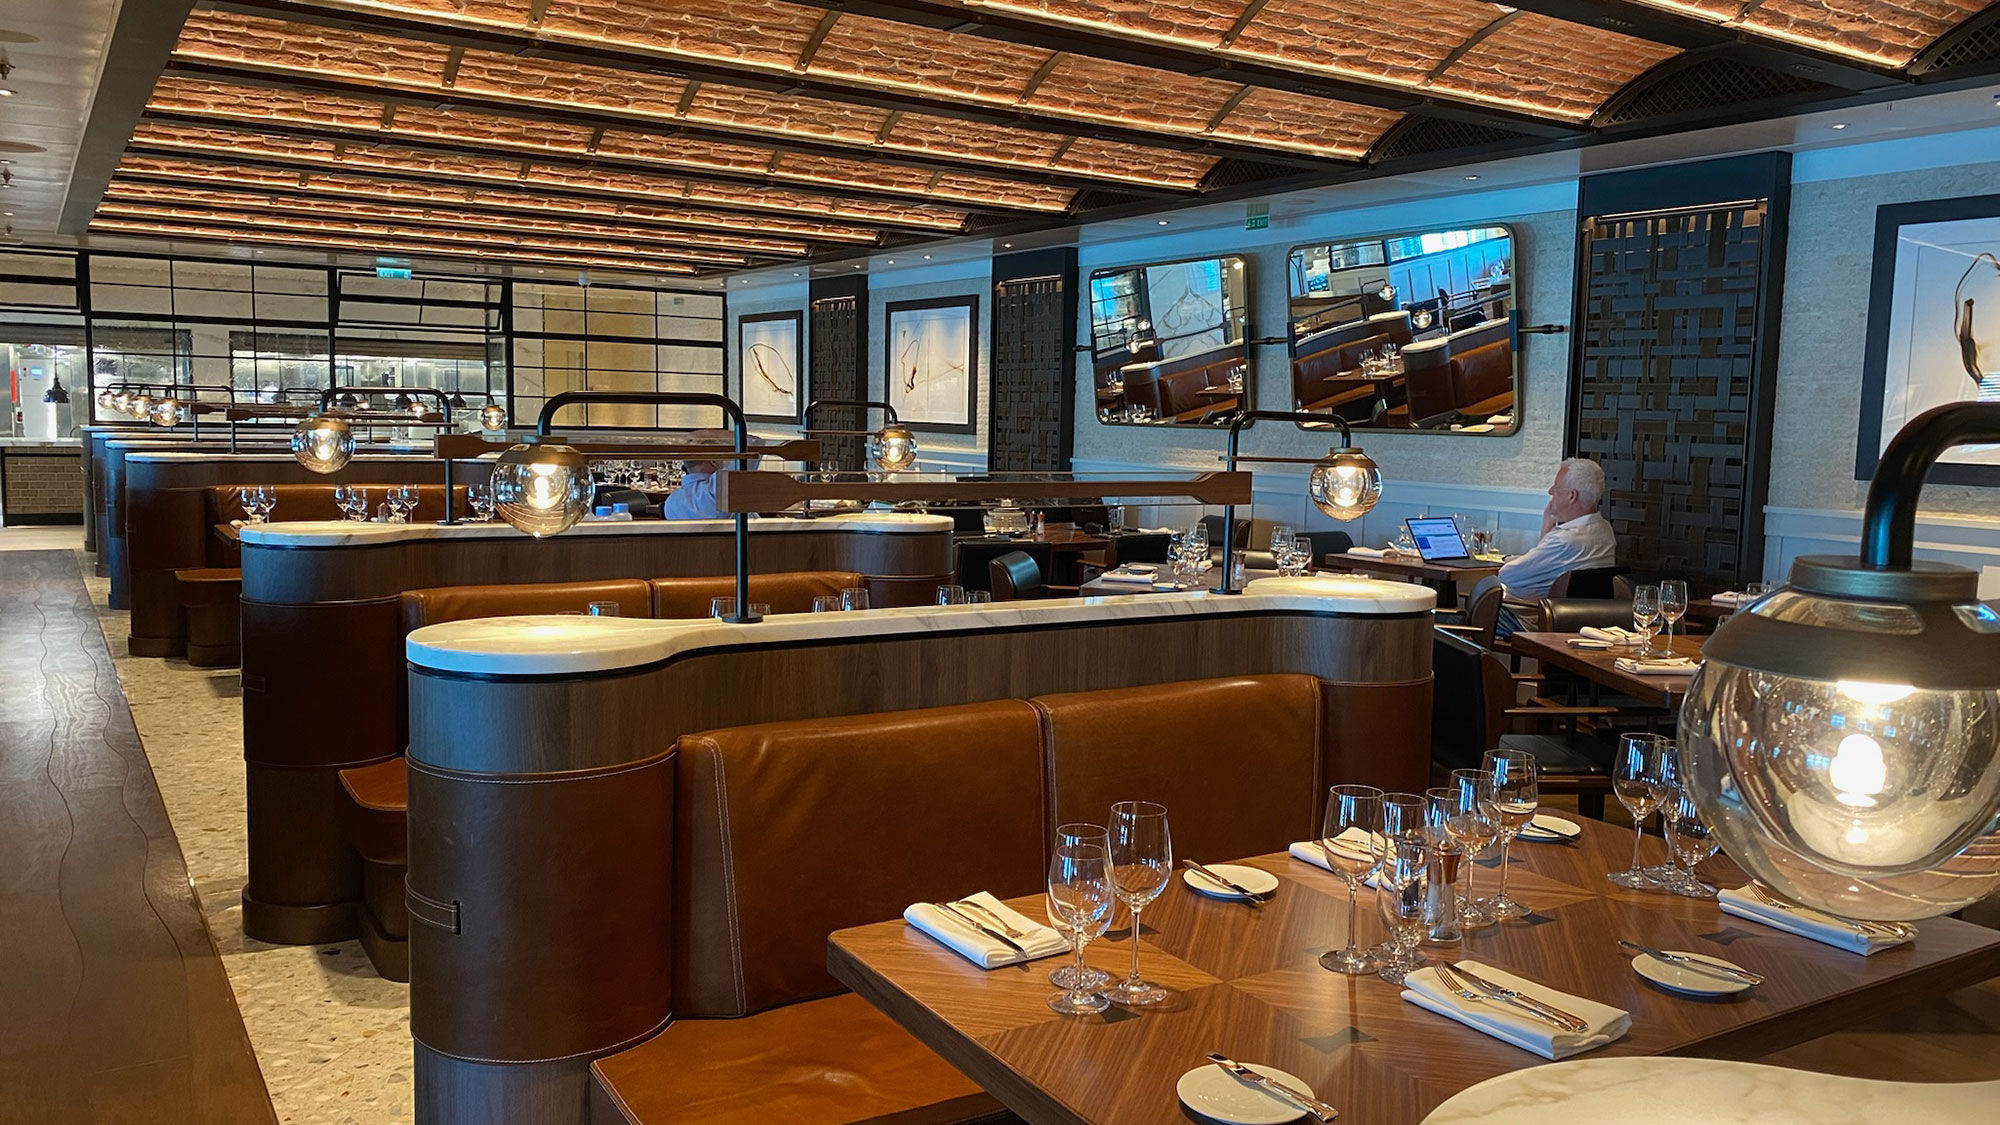 The design of the new Ember restaurant on the Oceania Vista features curved brick-like ceilings and an open kitchen serving up American-style cuisine.